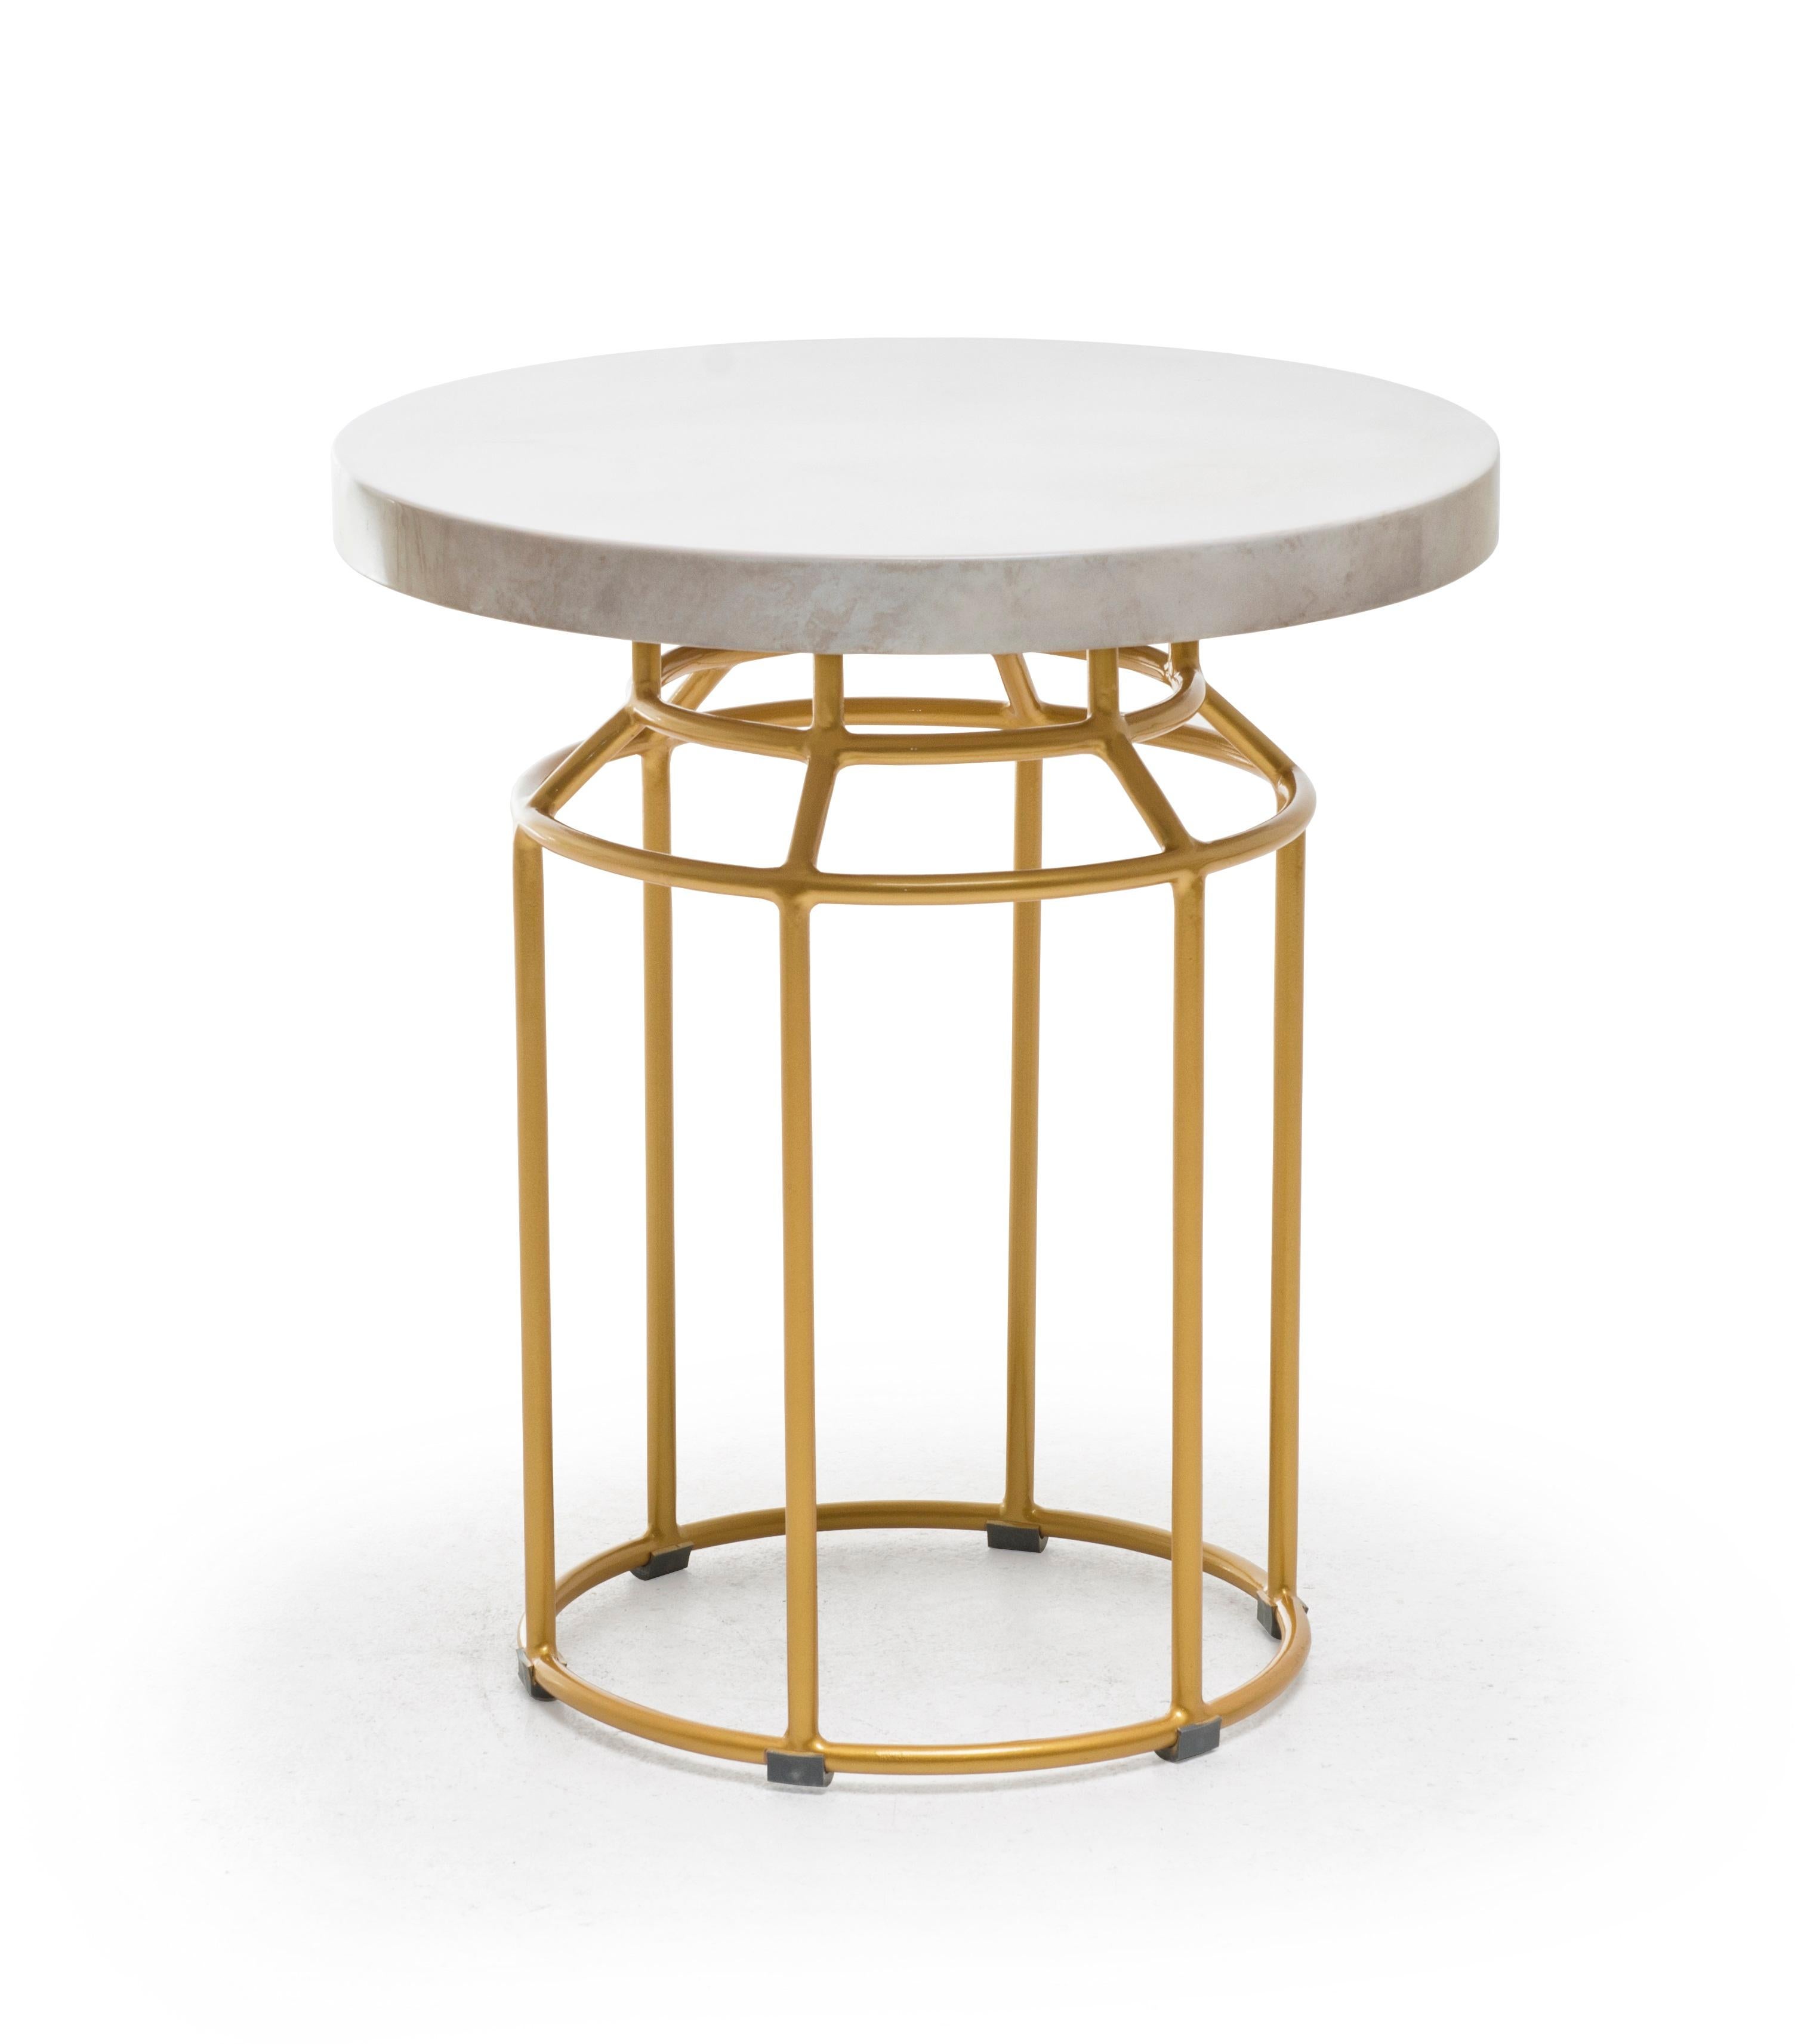 Outdoor Mason end table by Kenneth Cobonpue.
Materials: Fiberglass, aluminum.
Also available in other colors. 
Dimensions: Diameter 50cm x height 55cm. 

Jars are typically placed on shelves and cupboards. Mason is a reimagining of that,